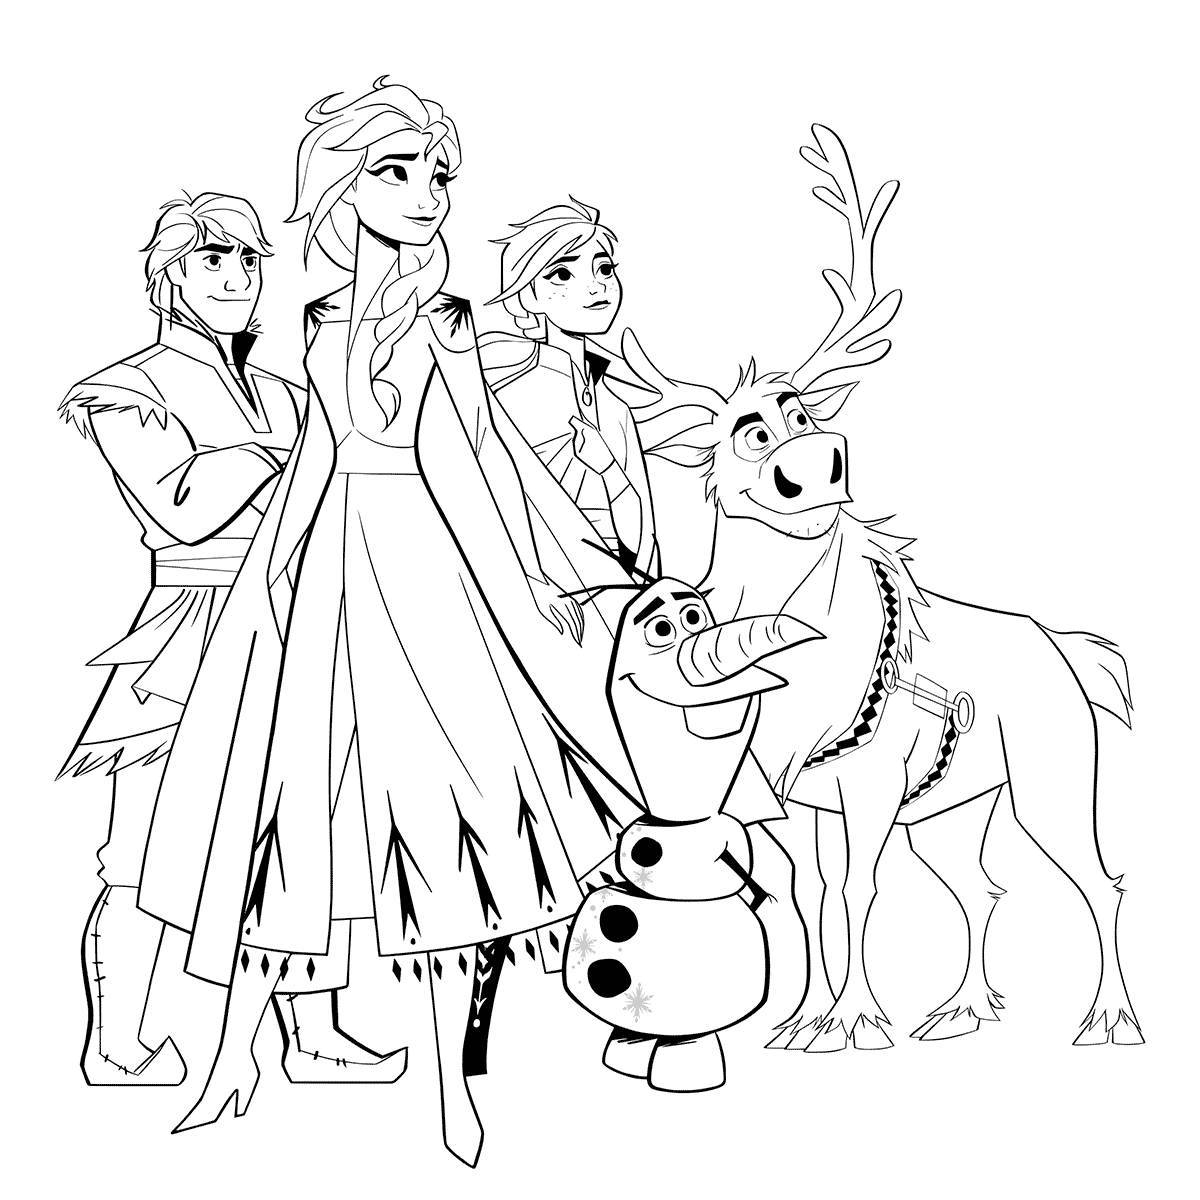 Incredible Frozen coloring book for kids